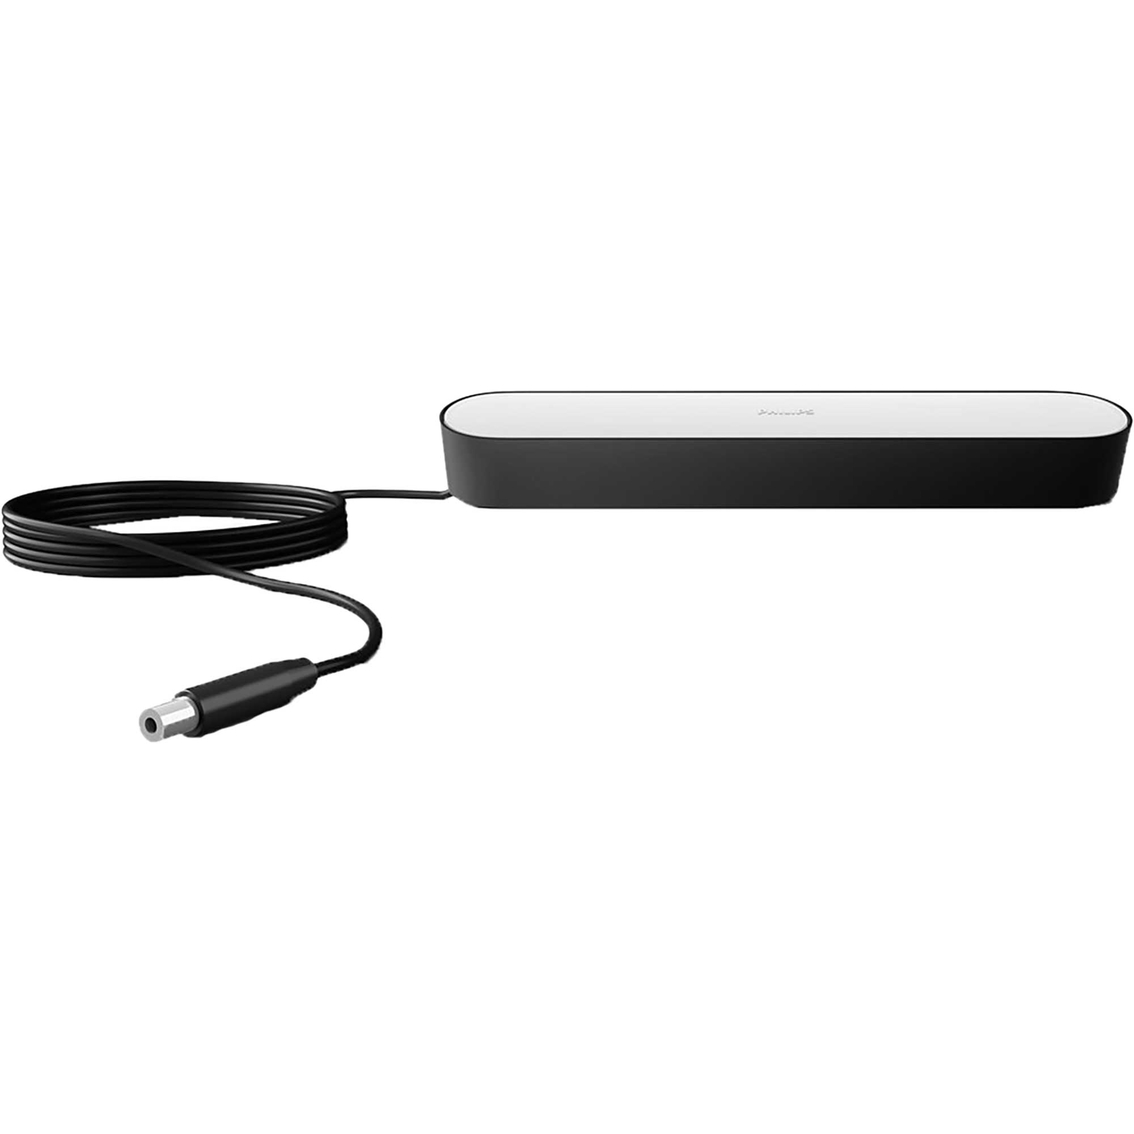 Philips Hue Play Light Bar Extension Base Pack, Black - Image 4 of 7